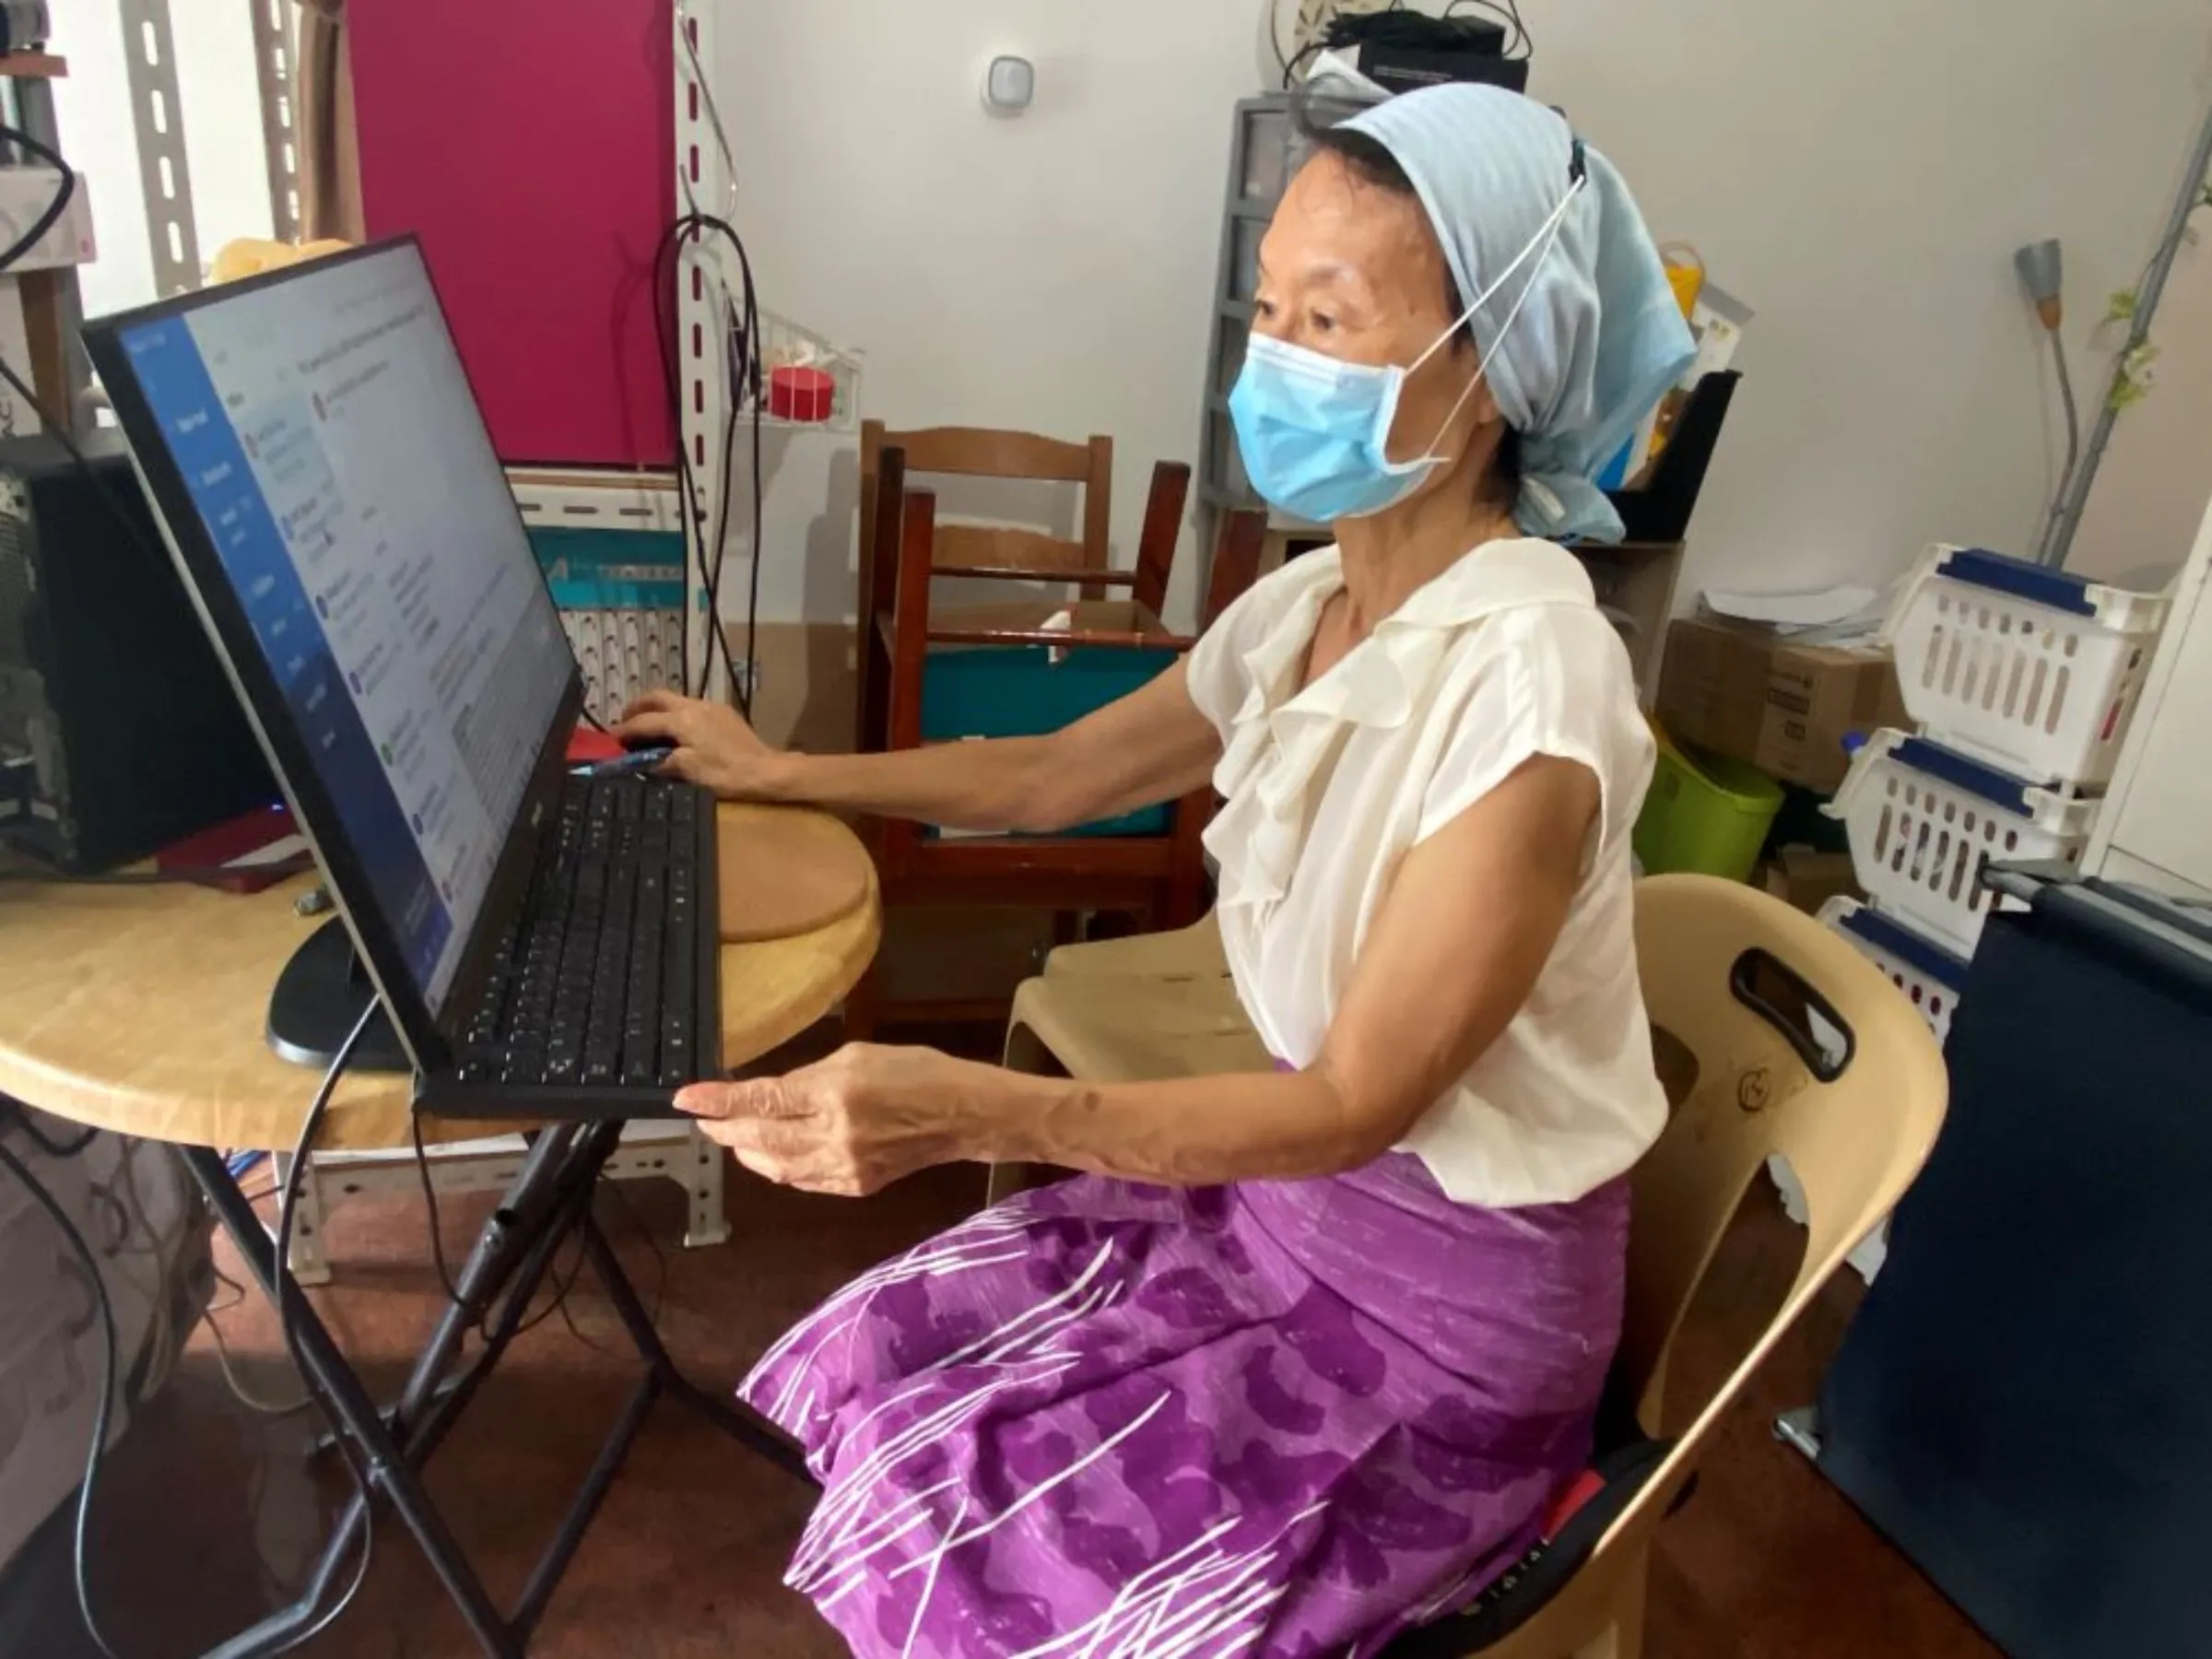 Evelyn, 74, works at her computer near a WiFi motion sensor in her home in Singapore. December 7, 2022. Thomson Reuters Foundation/Rina Chandran